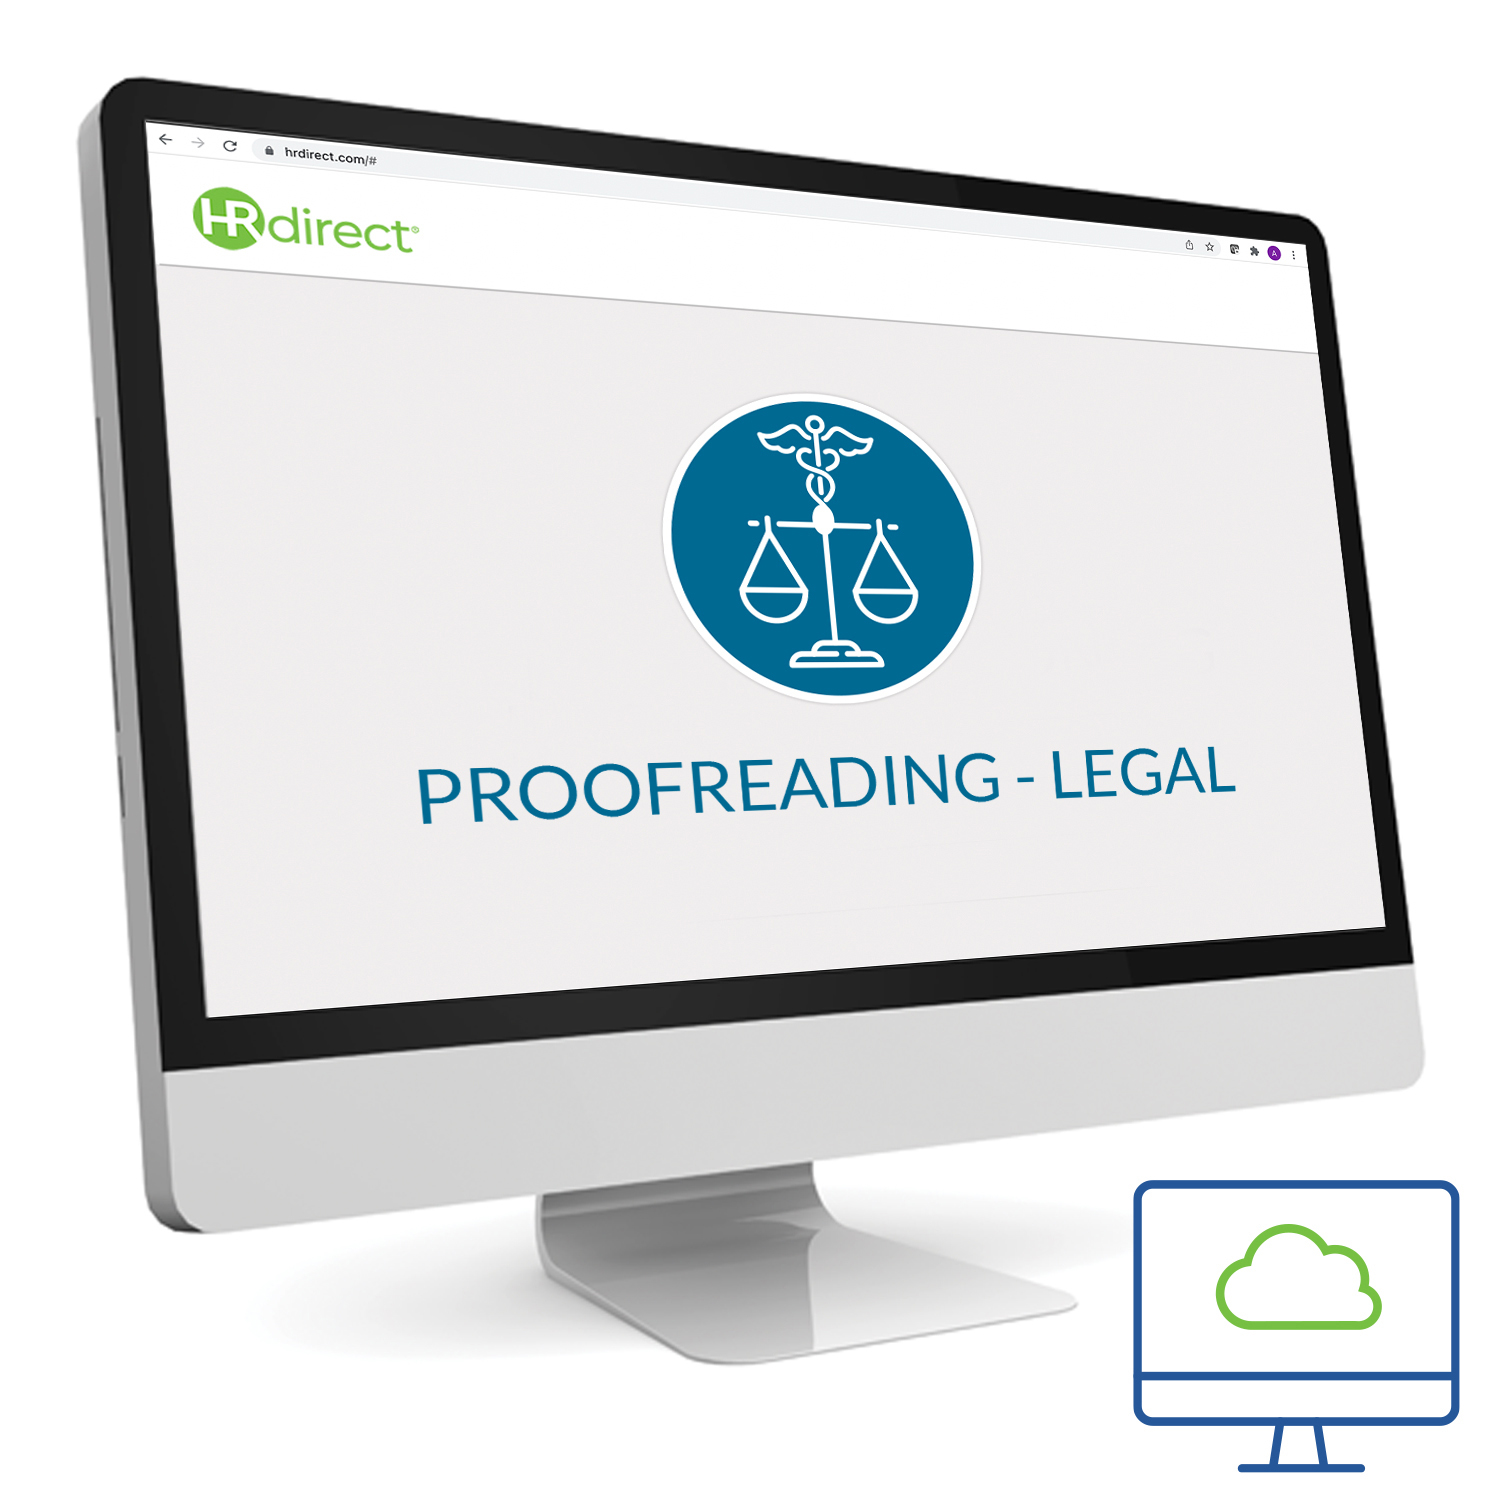 Legal Pre-Employment Test - Proofreading